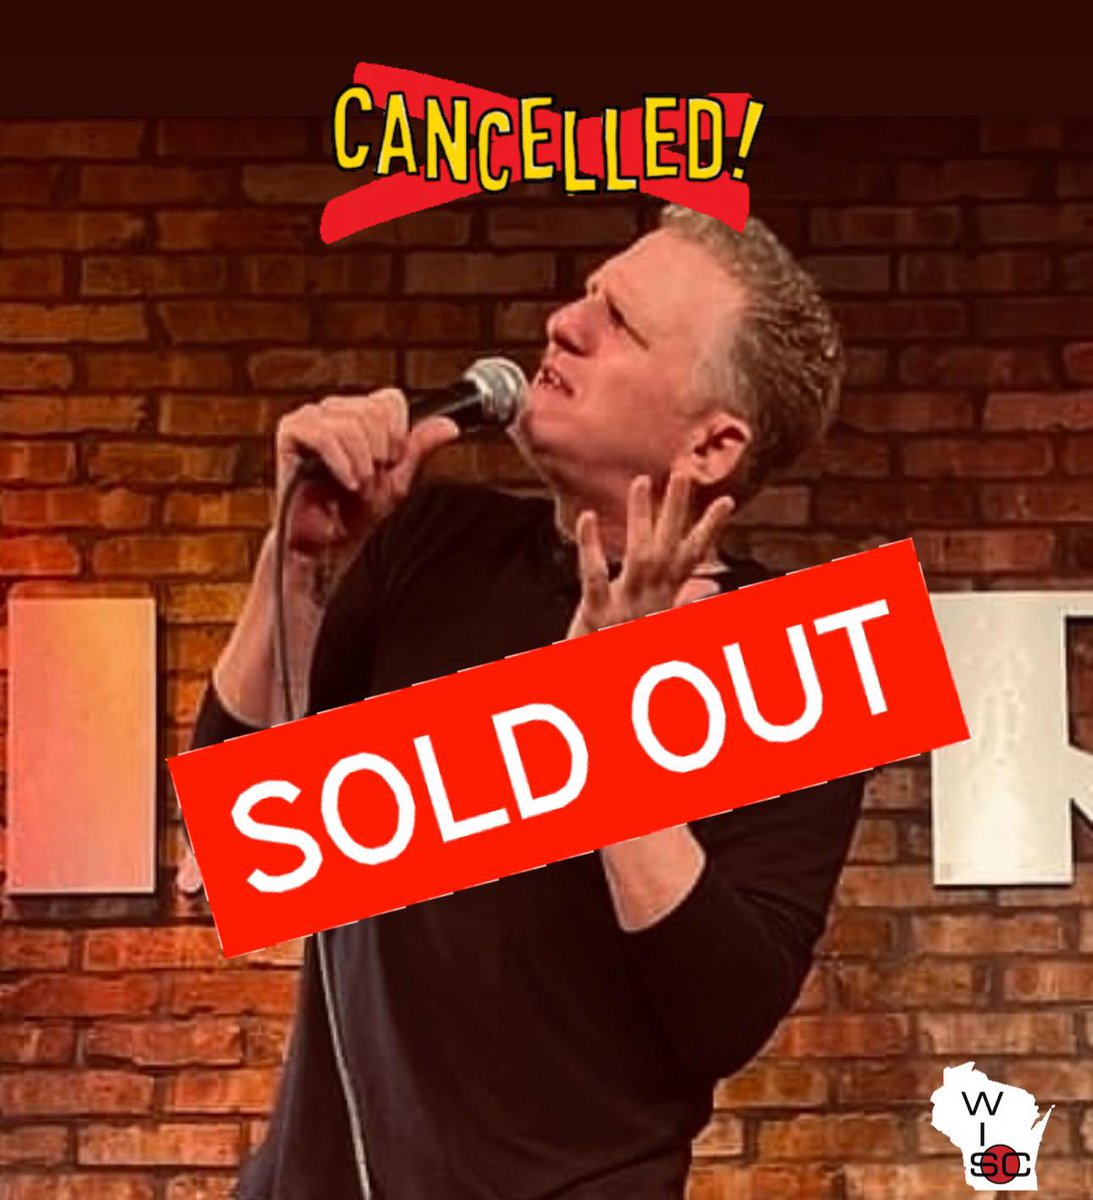 #BREAKING Madison bows to bullies. @MichaelRapaport’s sold out comedy shows in Madison, Wisconsin have been cancelled following threats from the pro-terror mob. The mob is screaming about the right to free speech, and here they are trying to silence a comedian just because he…